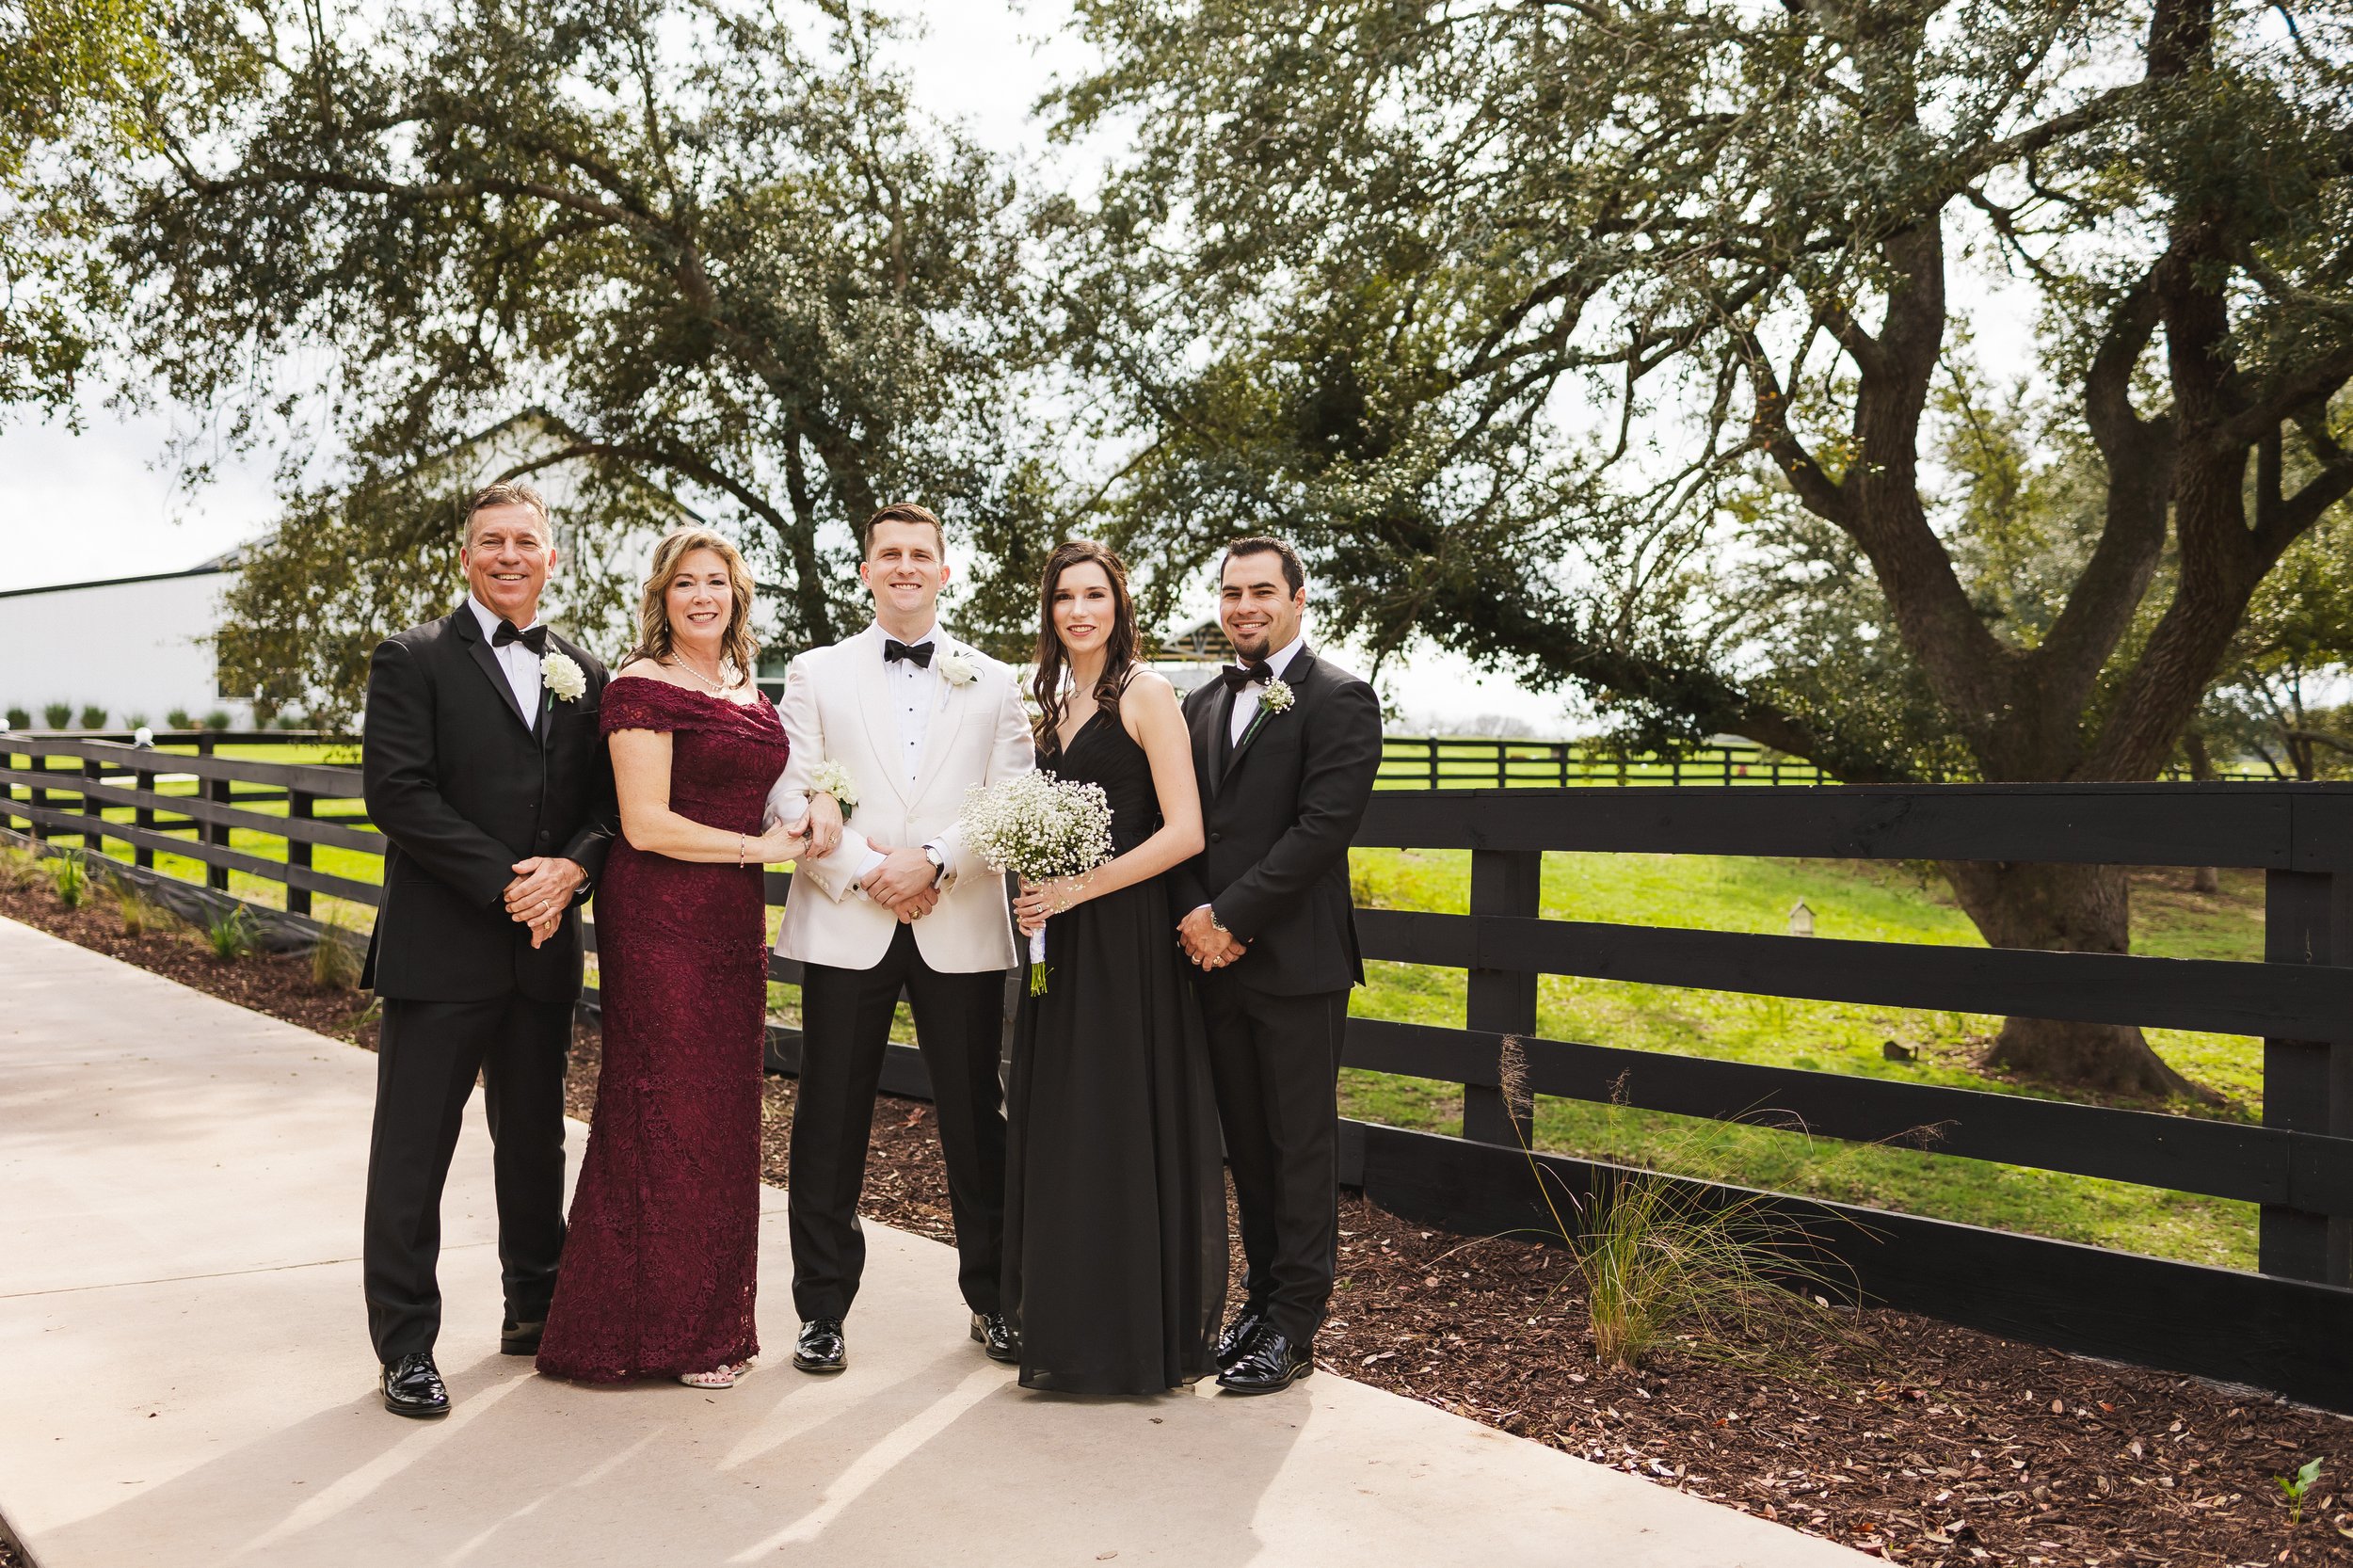 Charm your guests with Southern hospitality at unforgettable Texas wedding venues. Begin your love story in style.